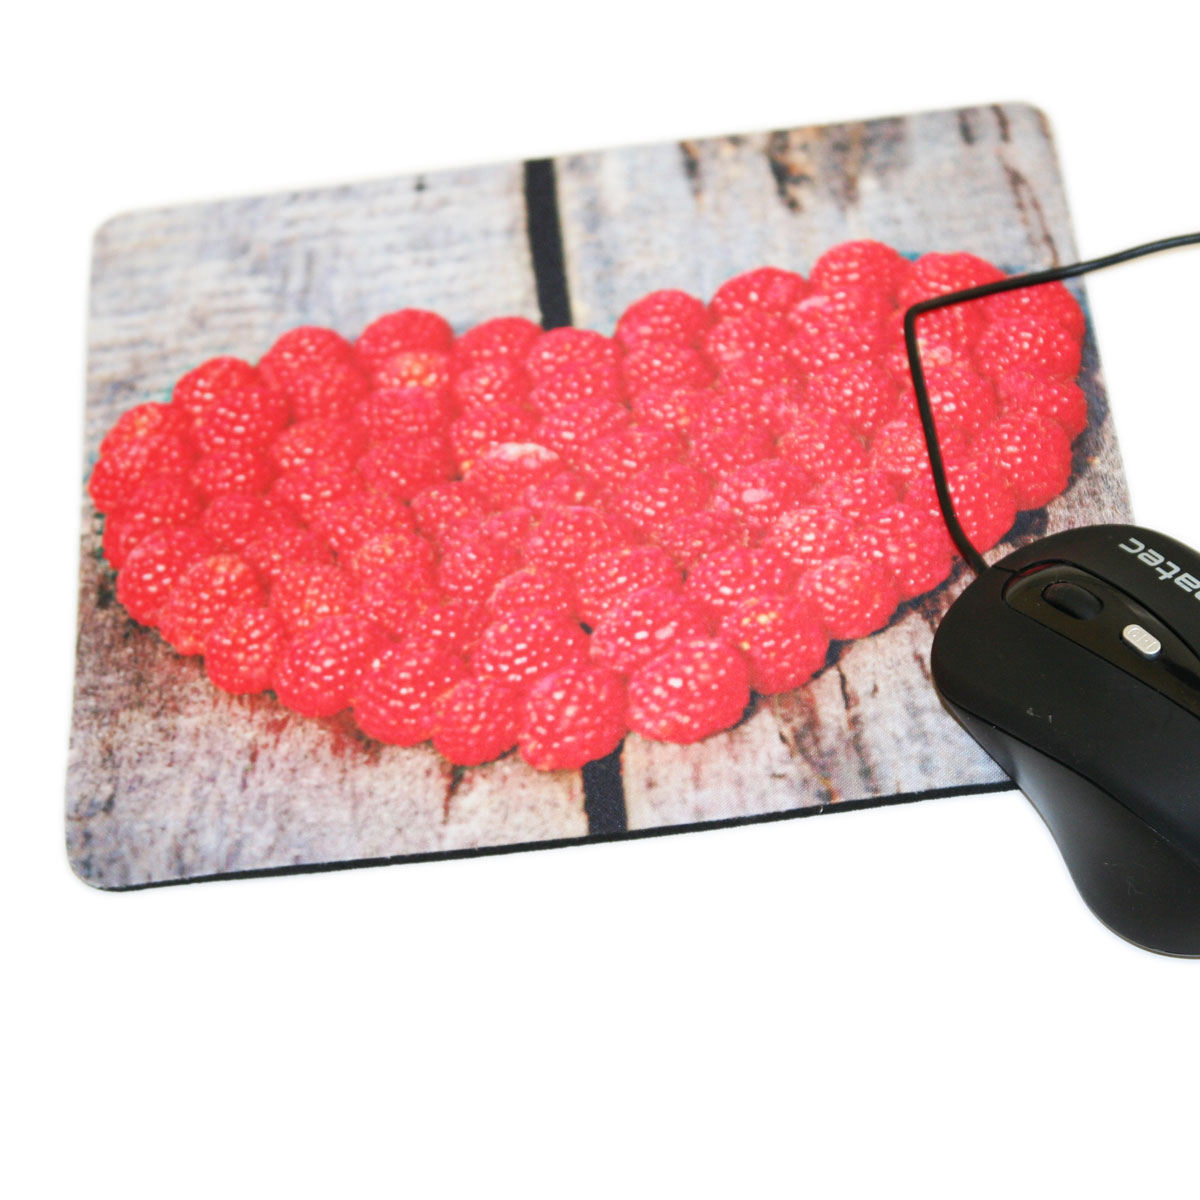 Mouse Pad for sublimation